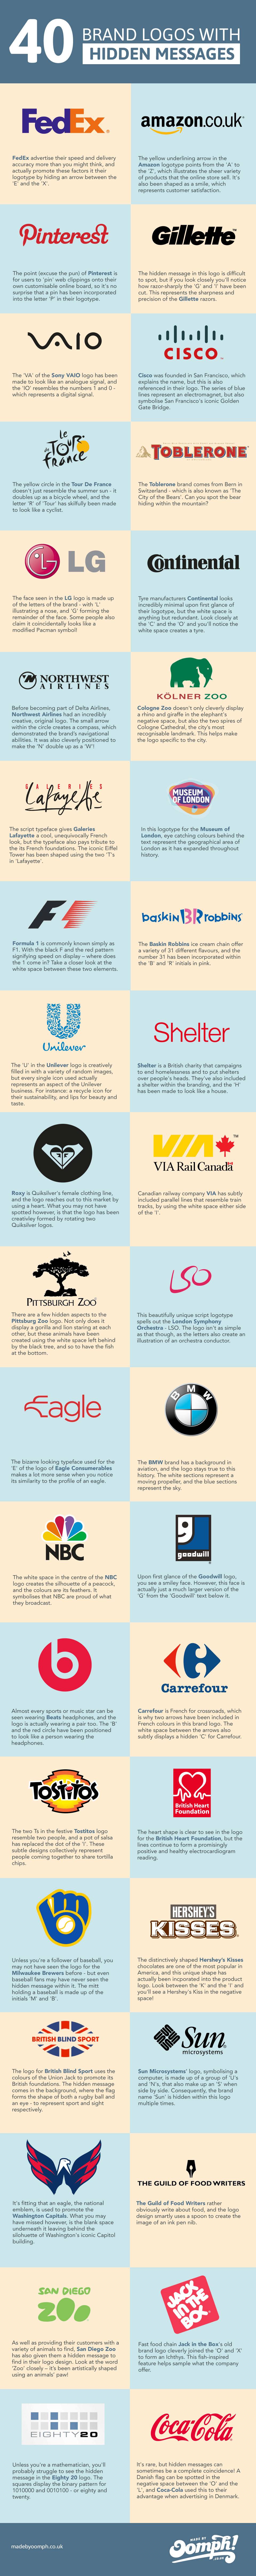 Red Sports Brand Logo - The Secret Meanings Behind 40 Brand Logos - Marketing Land